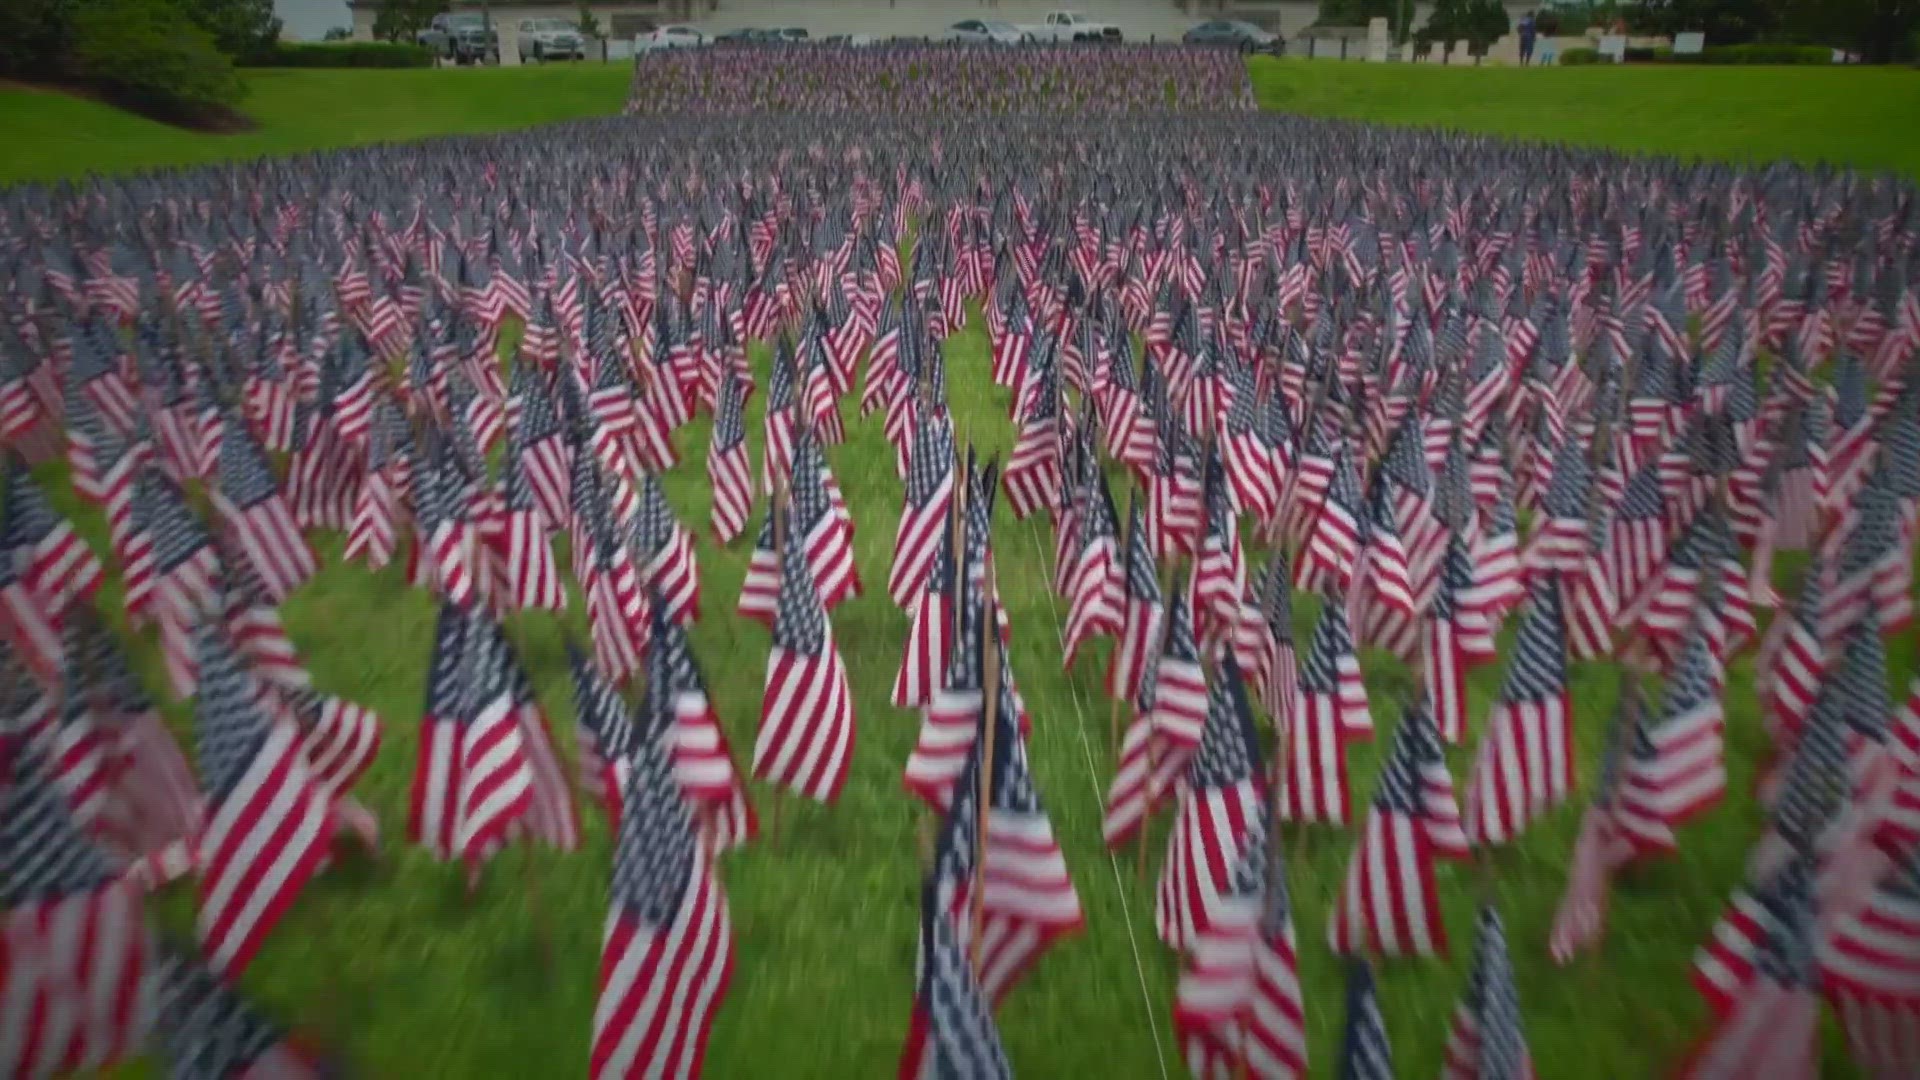 Eleven thousand American flags waved in the breeze representing those from the Bayou State who died in service to the country.